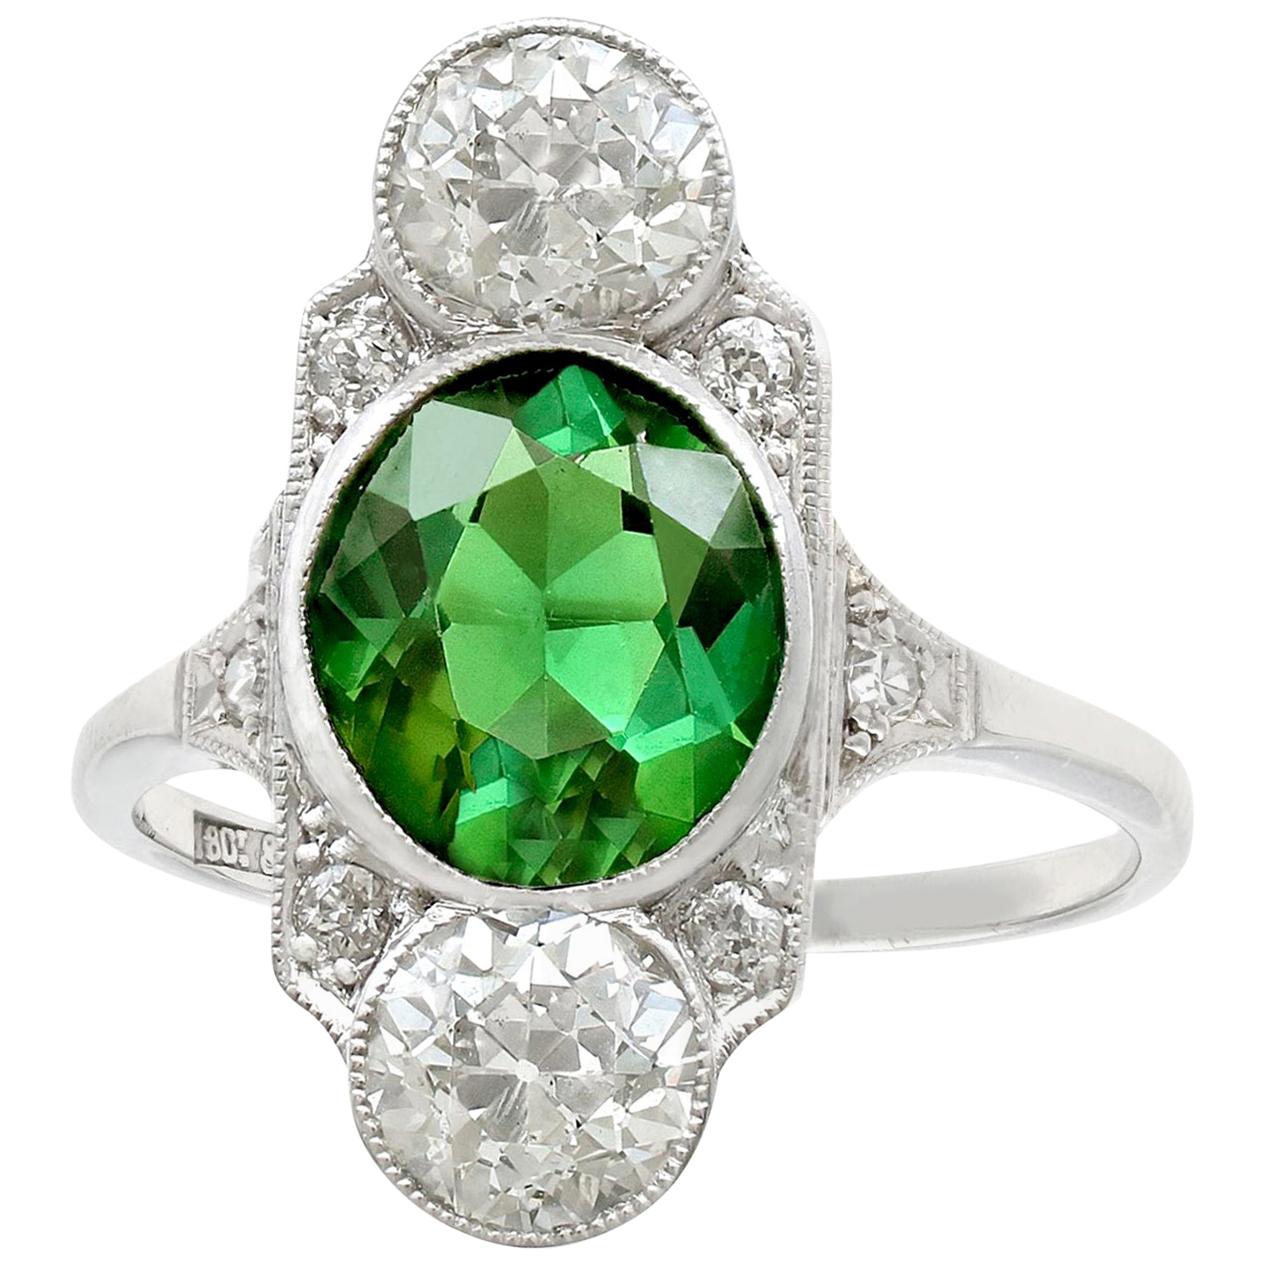 A stunning, fine and impressive antique 2.59 Ct natural tourmaline and 1.95 Ct diamond, 18k white gold, platinum set cocktail ring; part of our diverse antique jewelry and estate jewelry collections.

This fine antique cocktail ring has been crafted